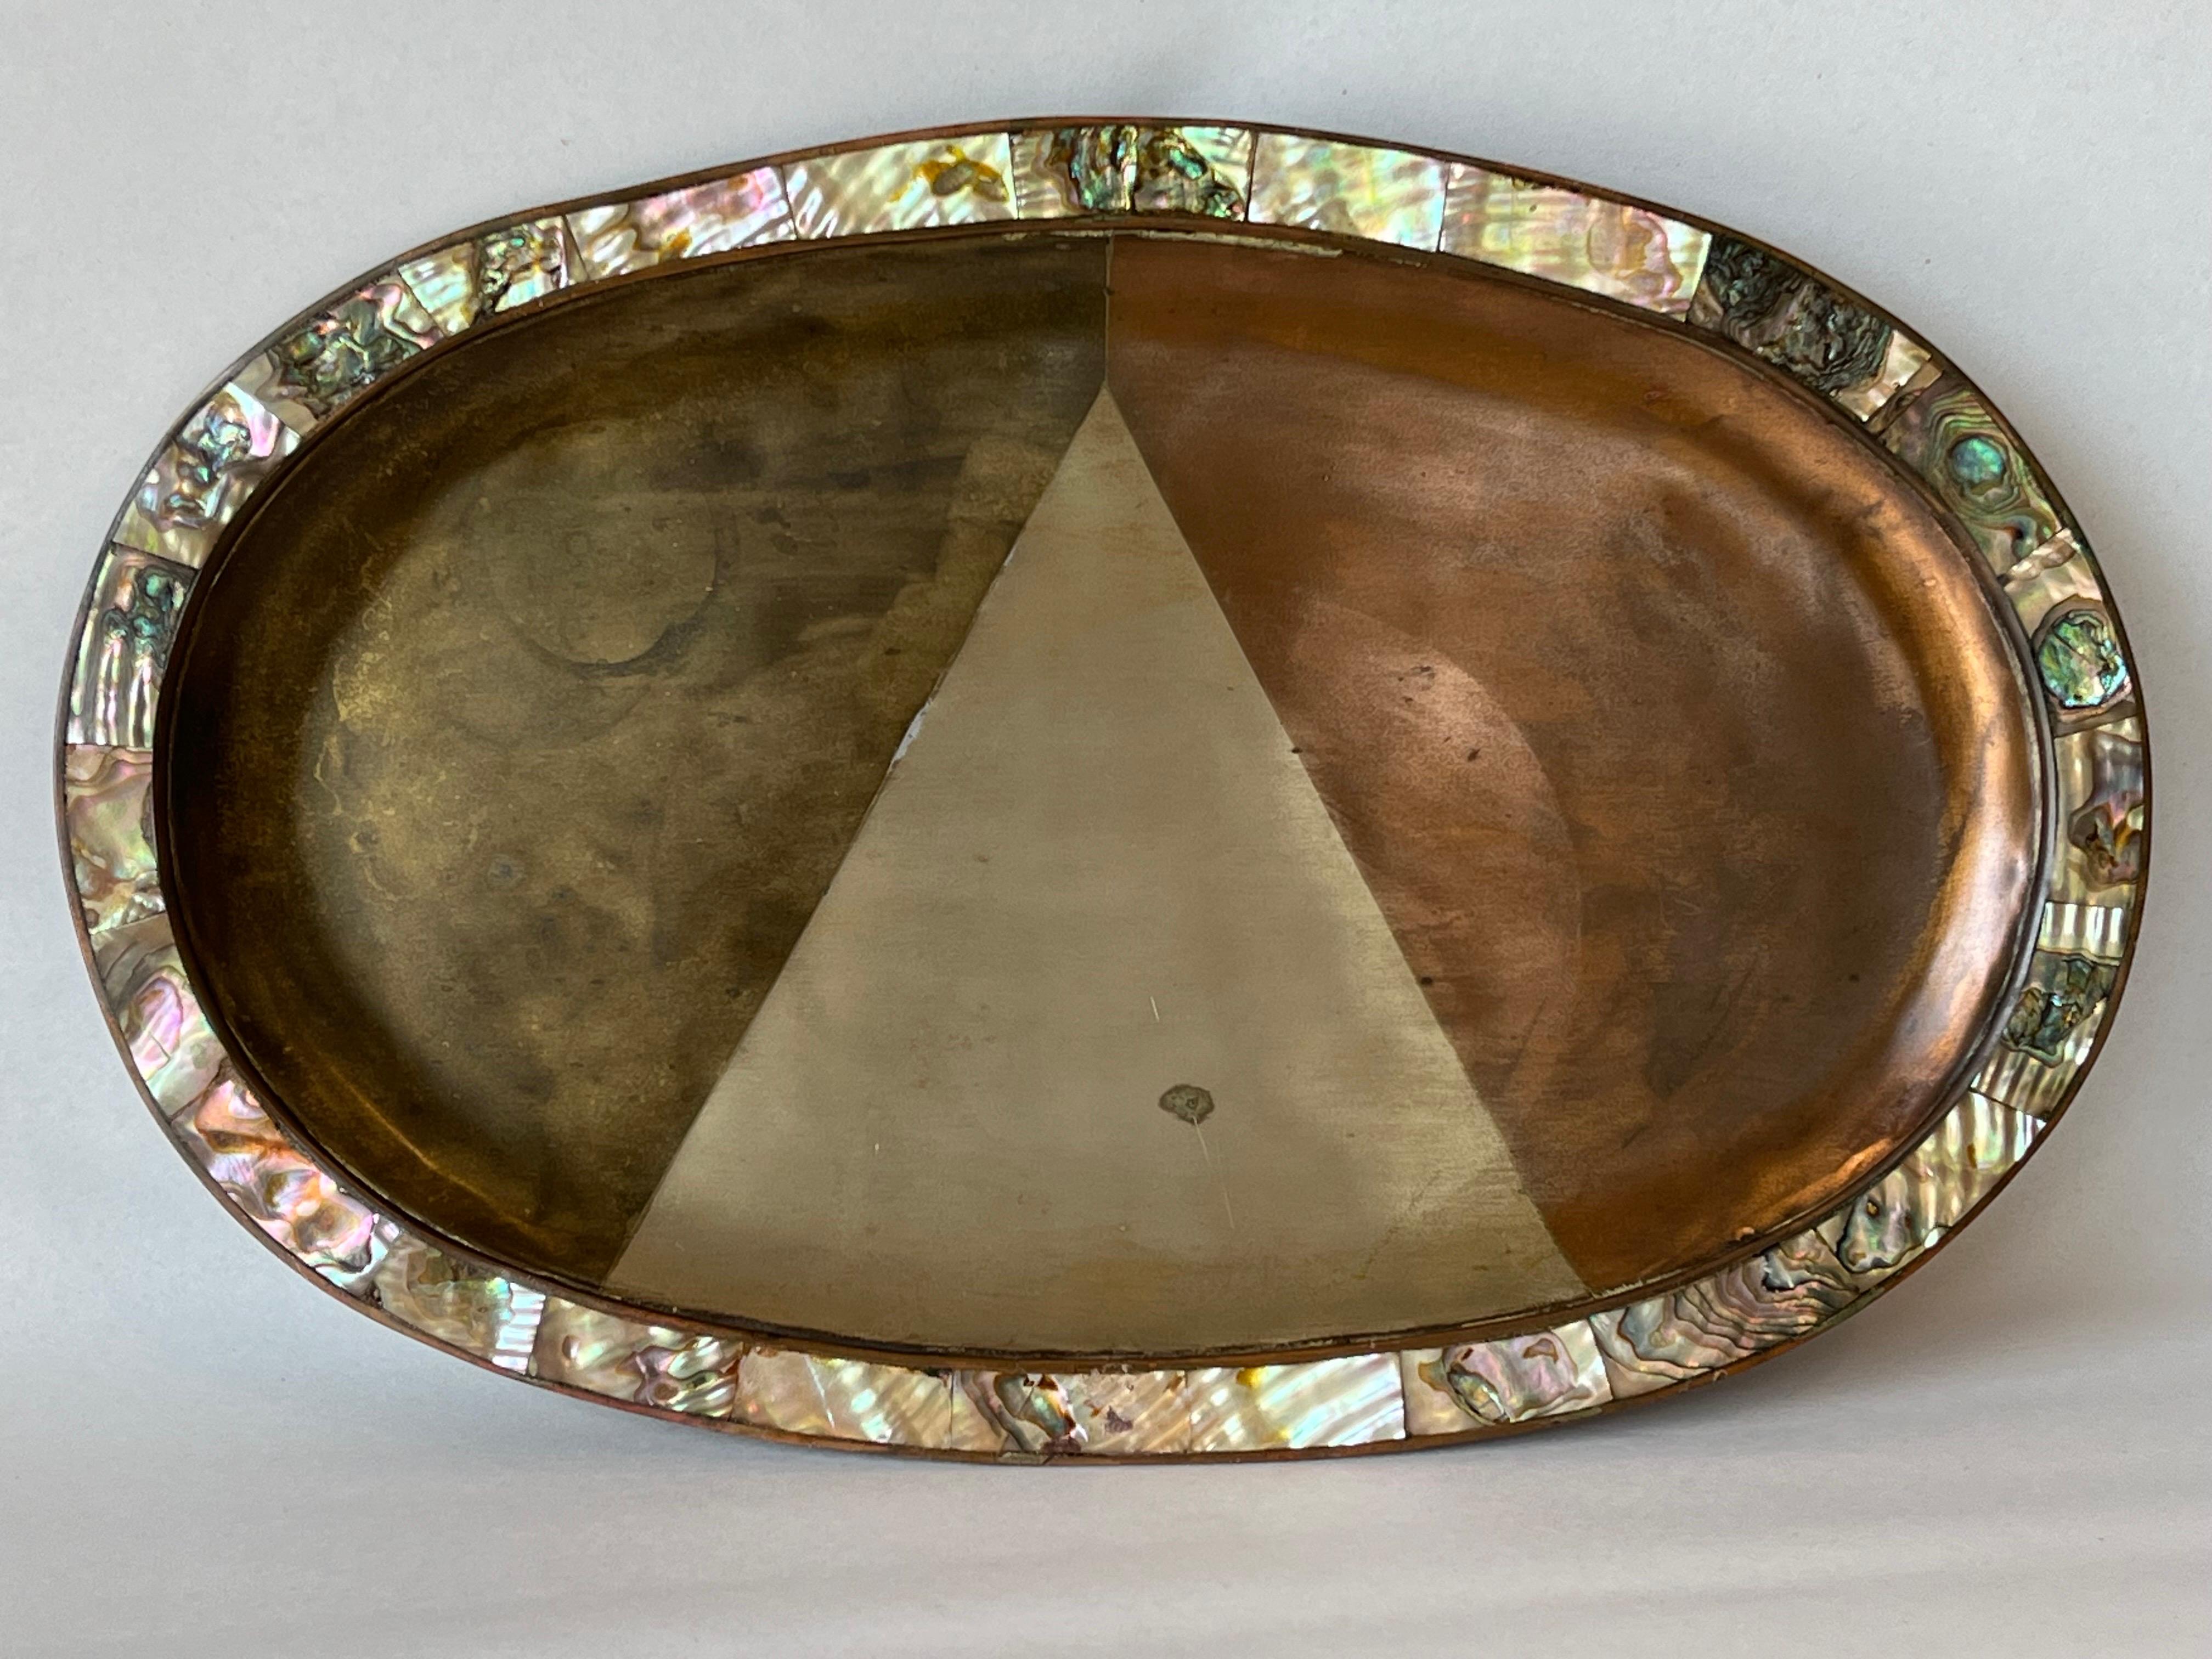 A vintage, mid century era mixed metal and shell border oval shaped tray with geometric, triangular design. This beautiful mixed metal tray is in the style of Los Castillo. This tray incorporates various metals along with a shell border with hints